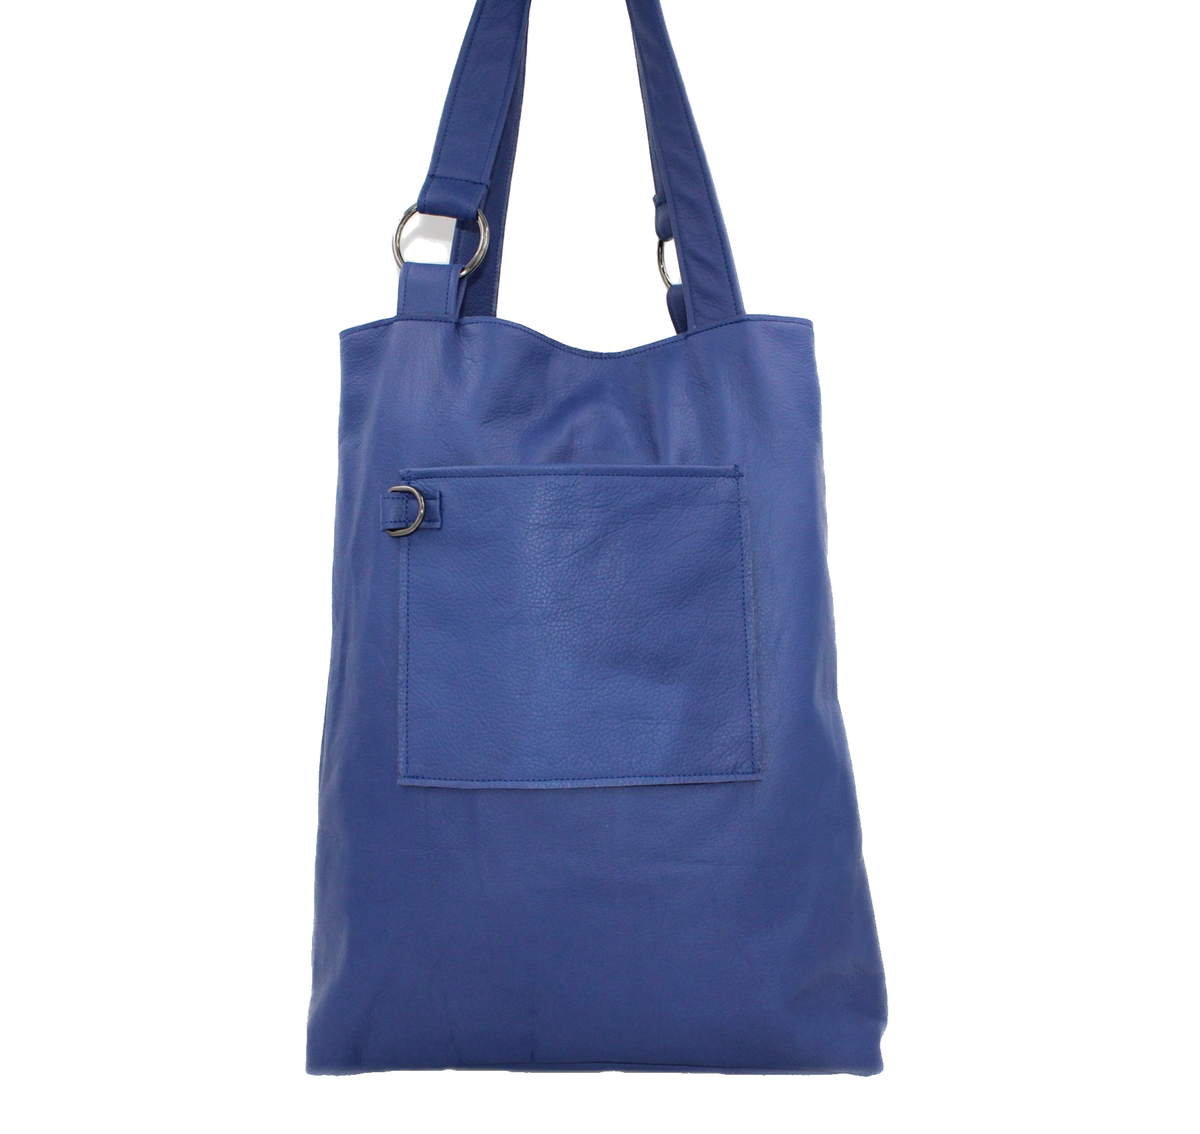 Slouch bag with ZIPPERLarge TOTE leather bag in NAVY blue. Soft natura –  Handmade suede bags by Good Times Barcelona